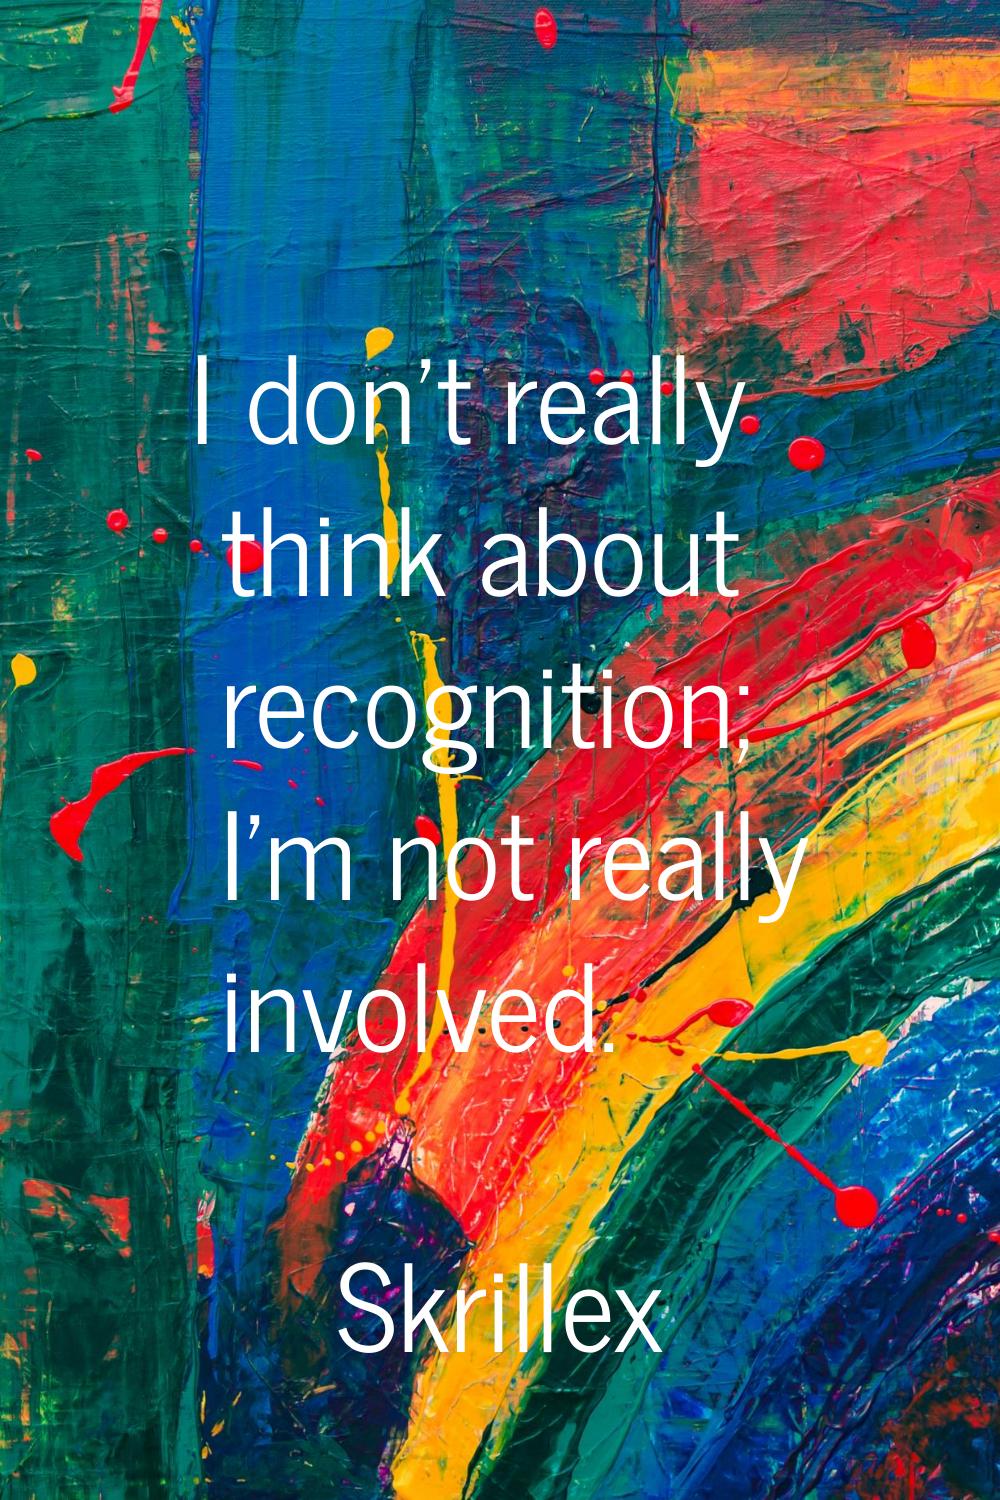 I don't really think about recognition; I'm not really involved.